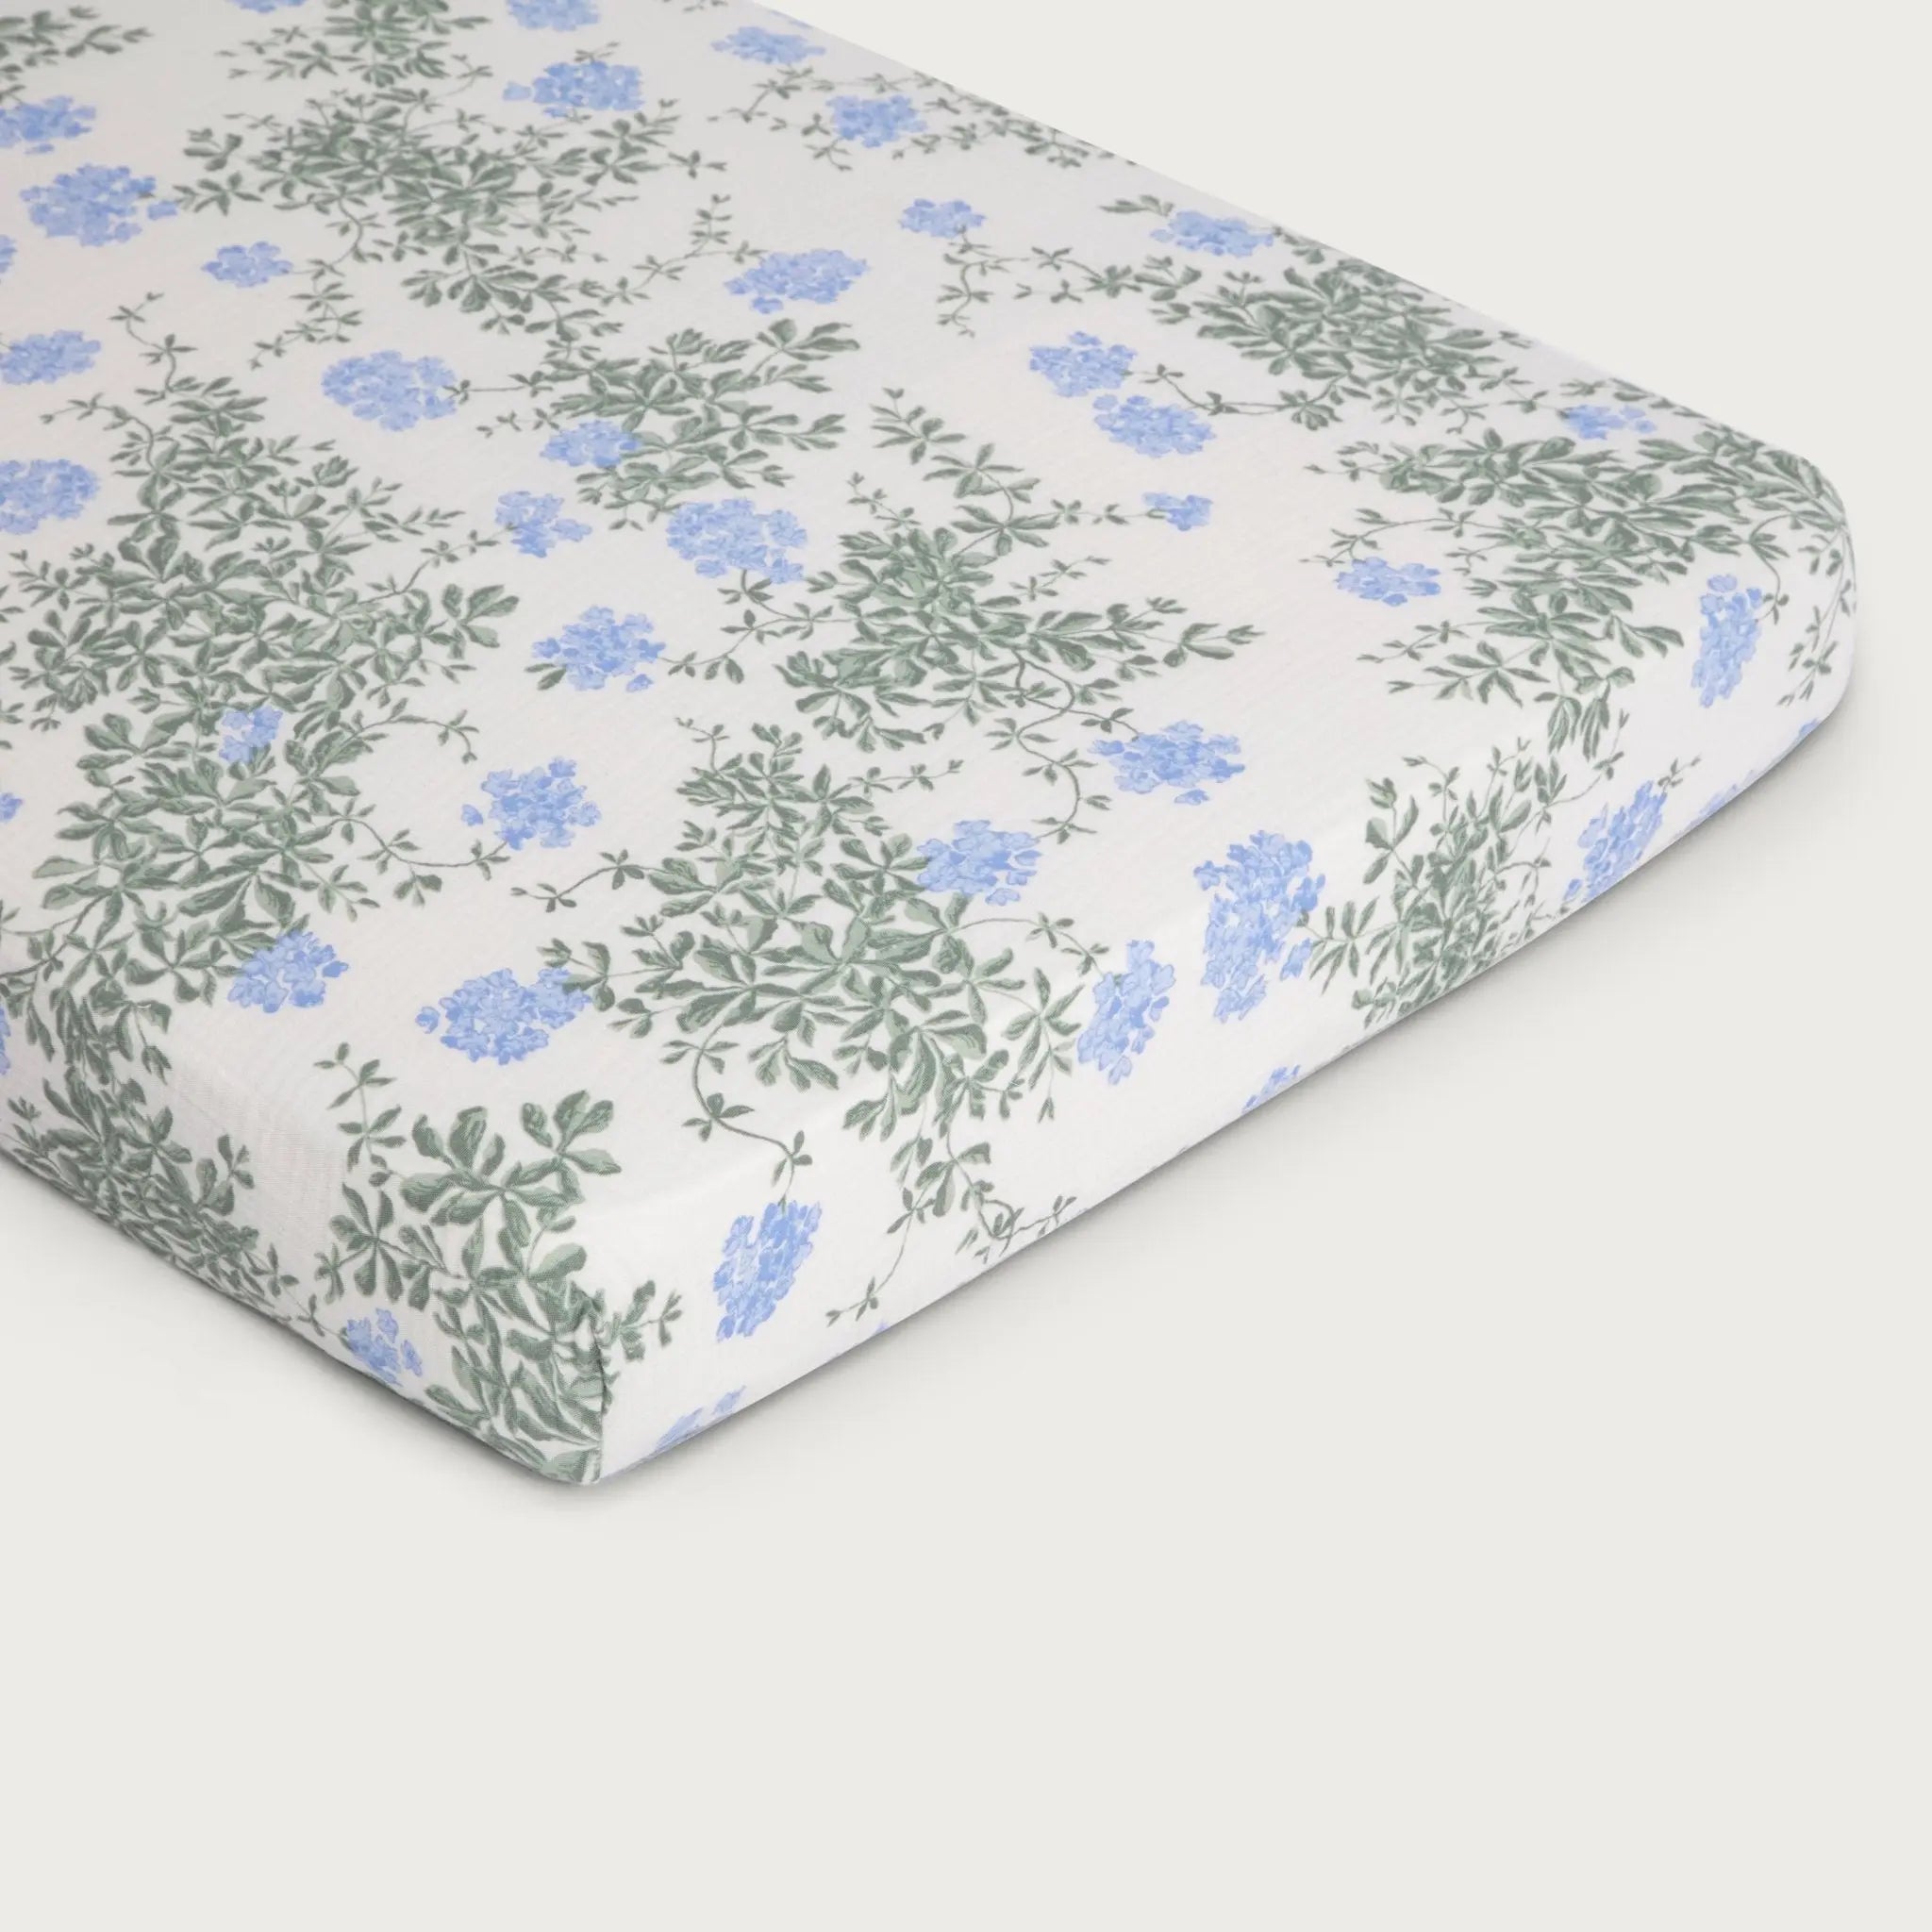 Plumbago Muslin Fitted Sheet Junior, Ethically Made in Portugal, OEKO-TEX® Certified  Garbo and Friends   